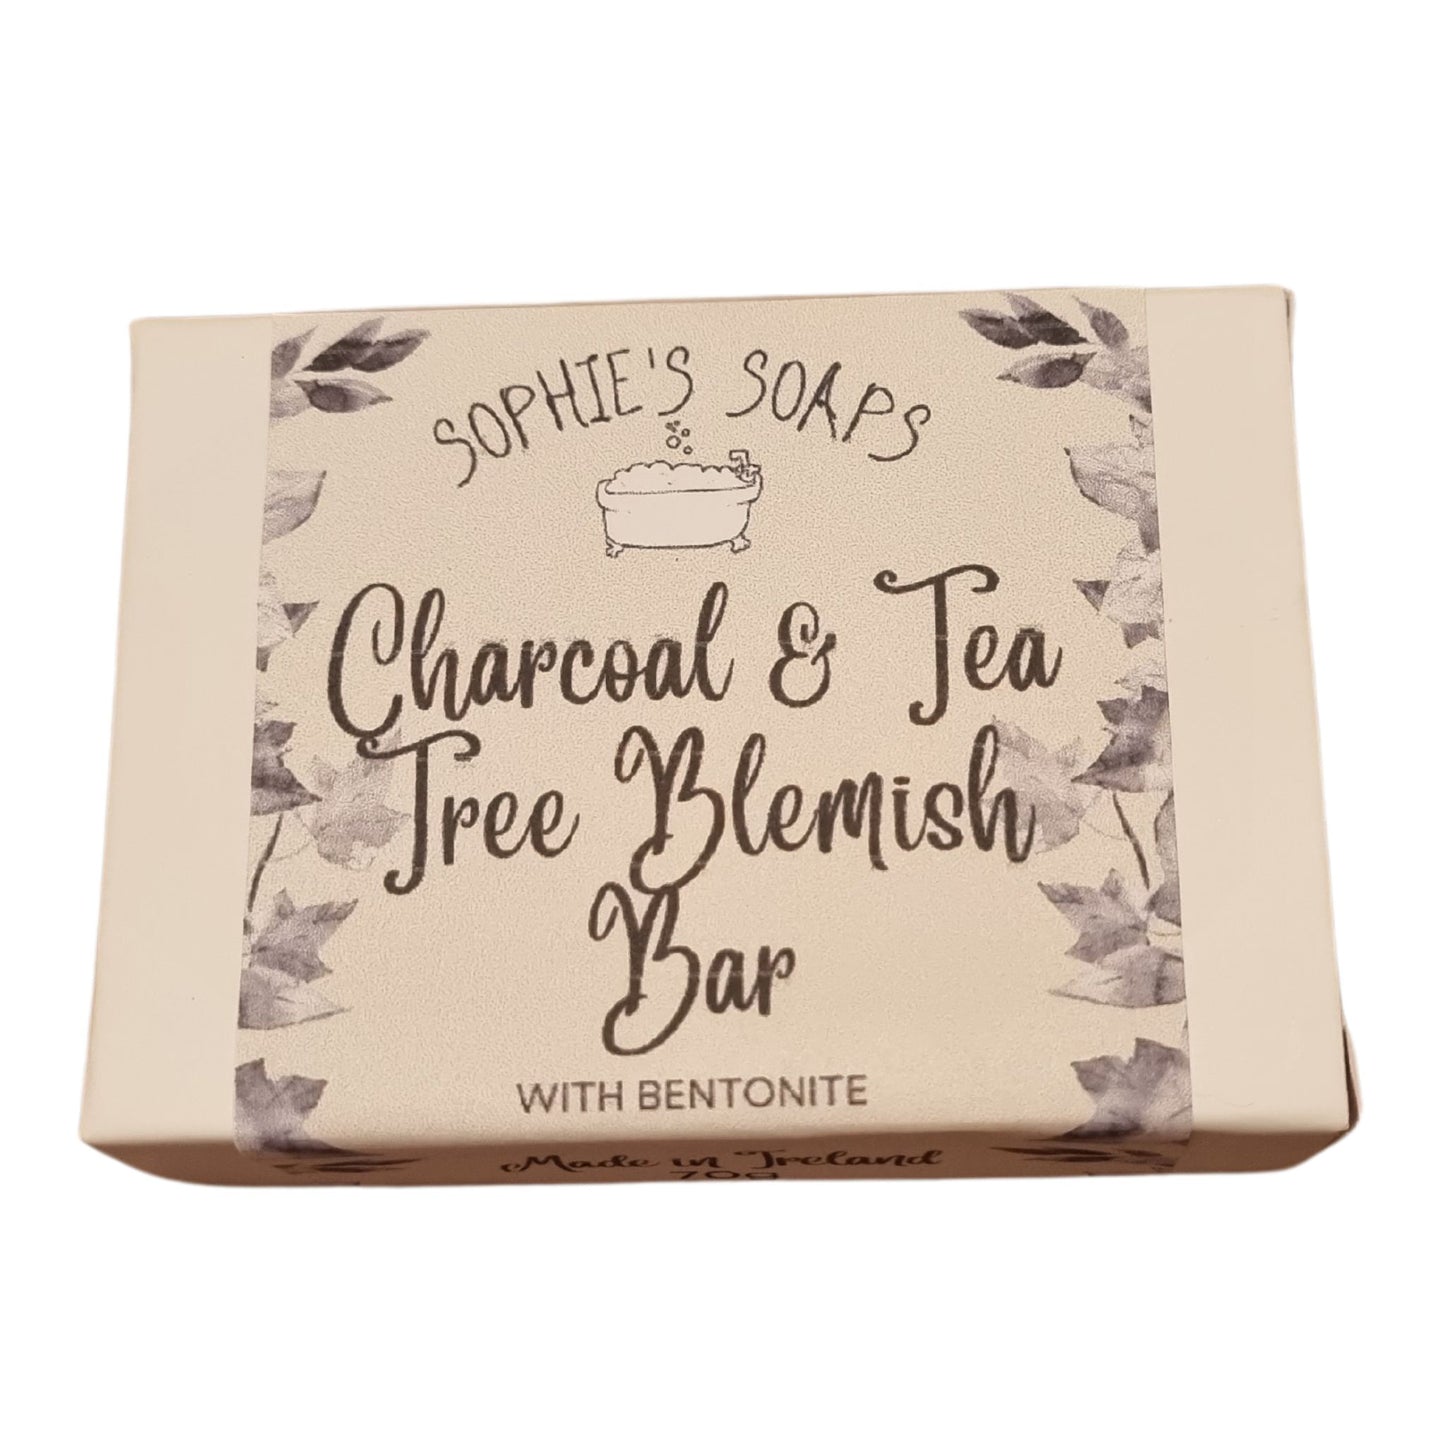 Charcoal and Tea Tree Blemish Bar - Sophie's Soaps